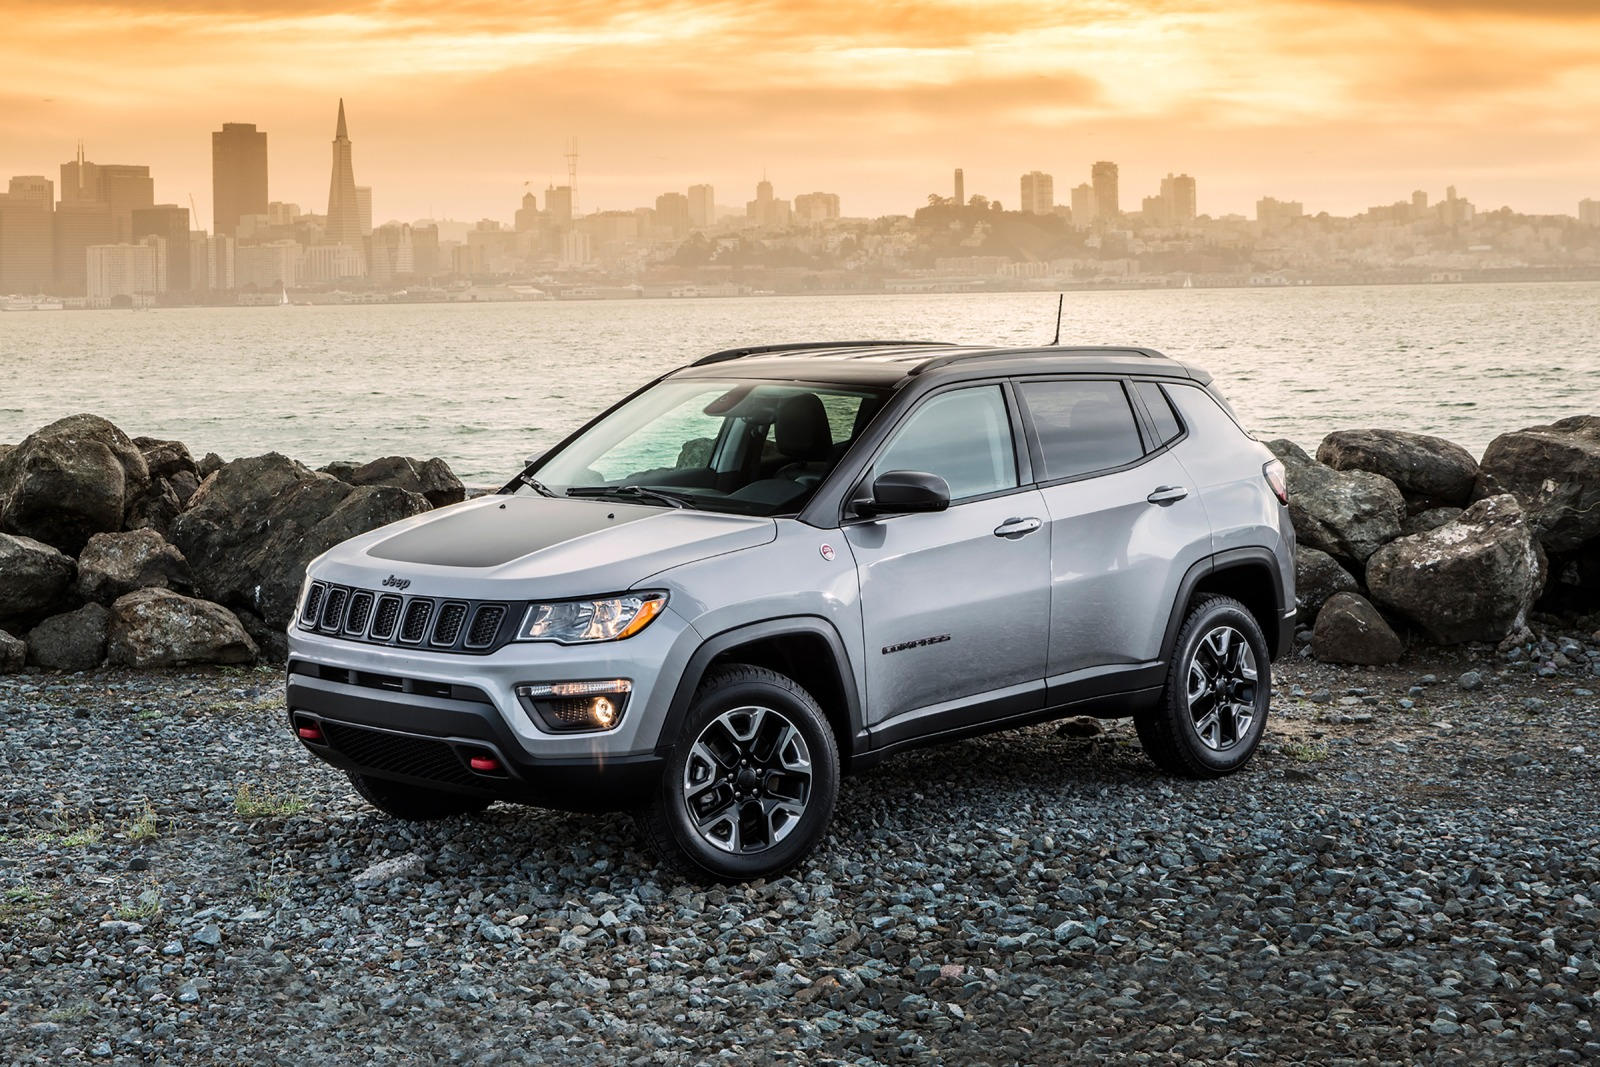 2021 Jeep® Compass - Small SUV With 4x4 Capability